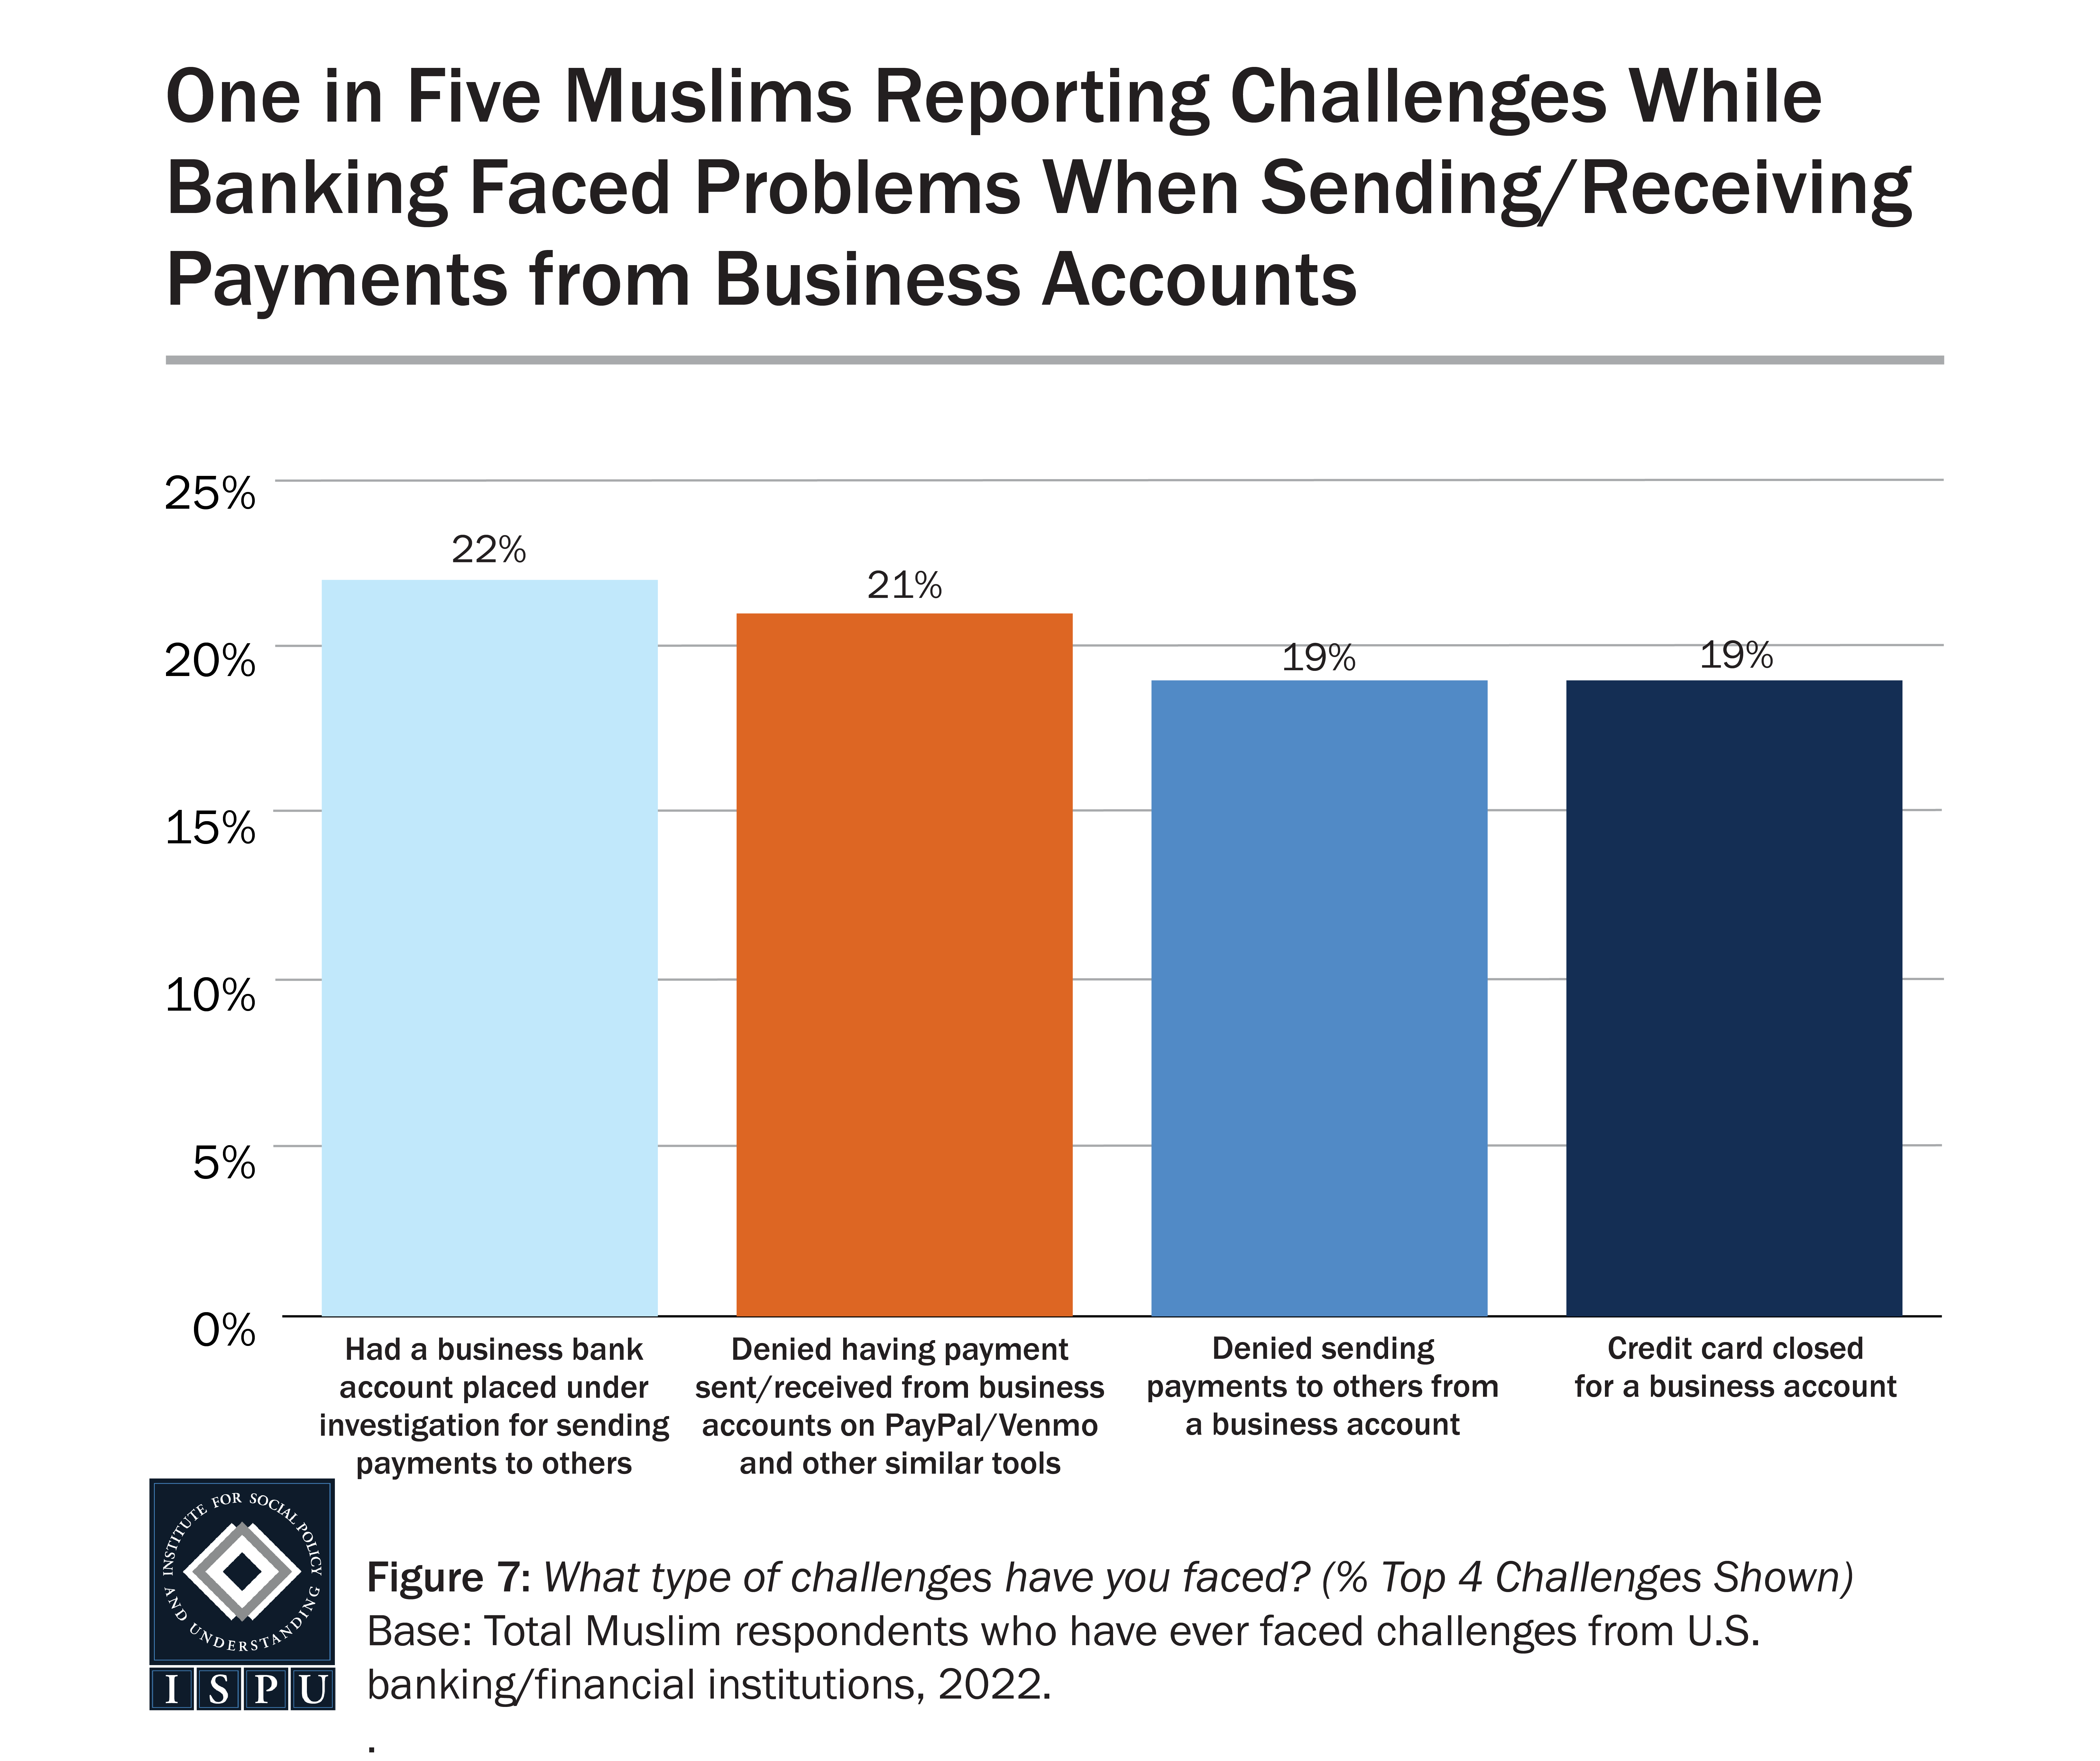 A bar graph showing the types of challenges faced with business accounts among Muslims who reported facing challenges while banking.